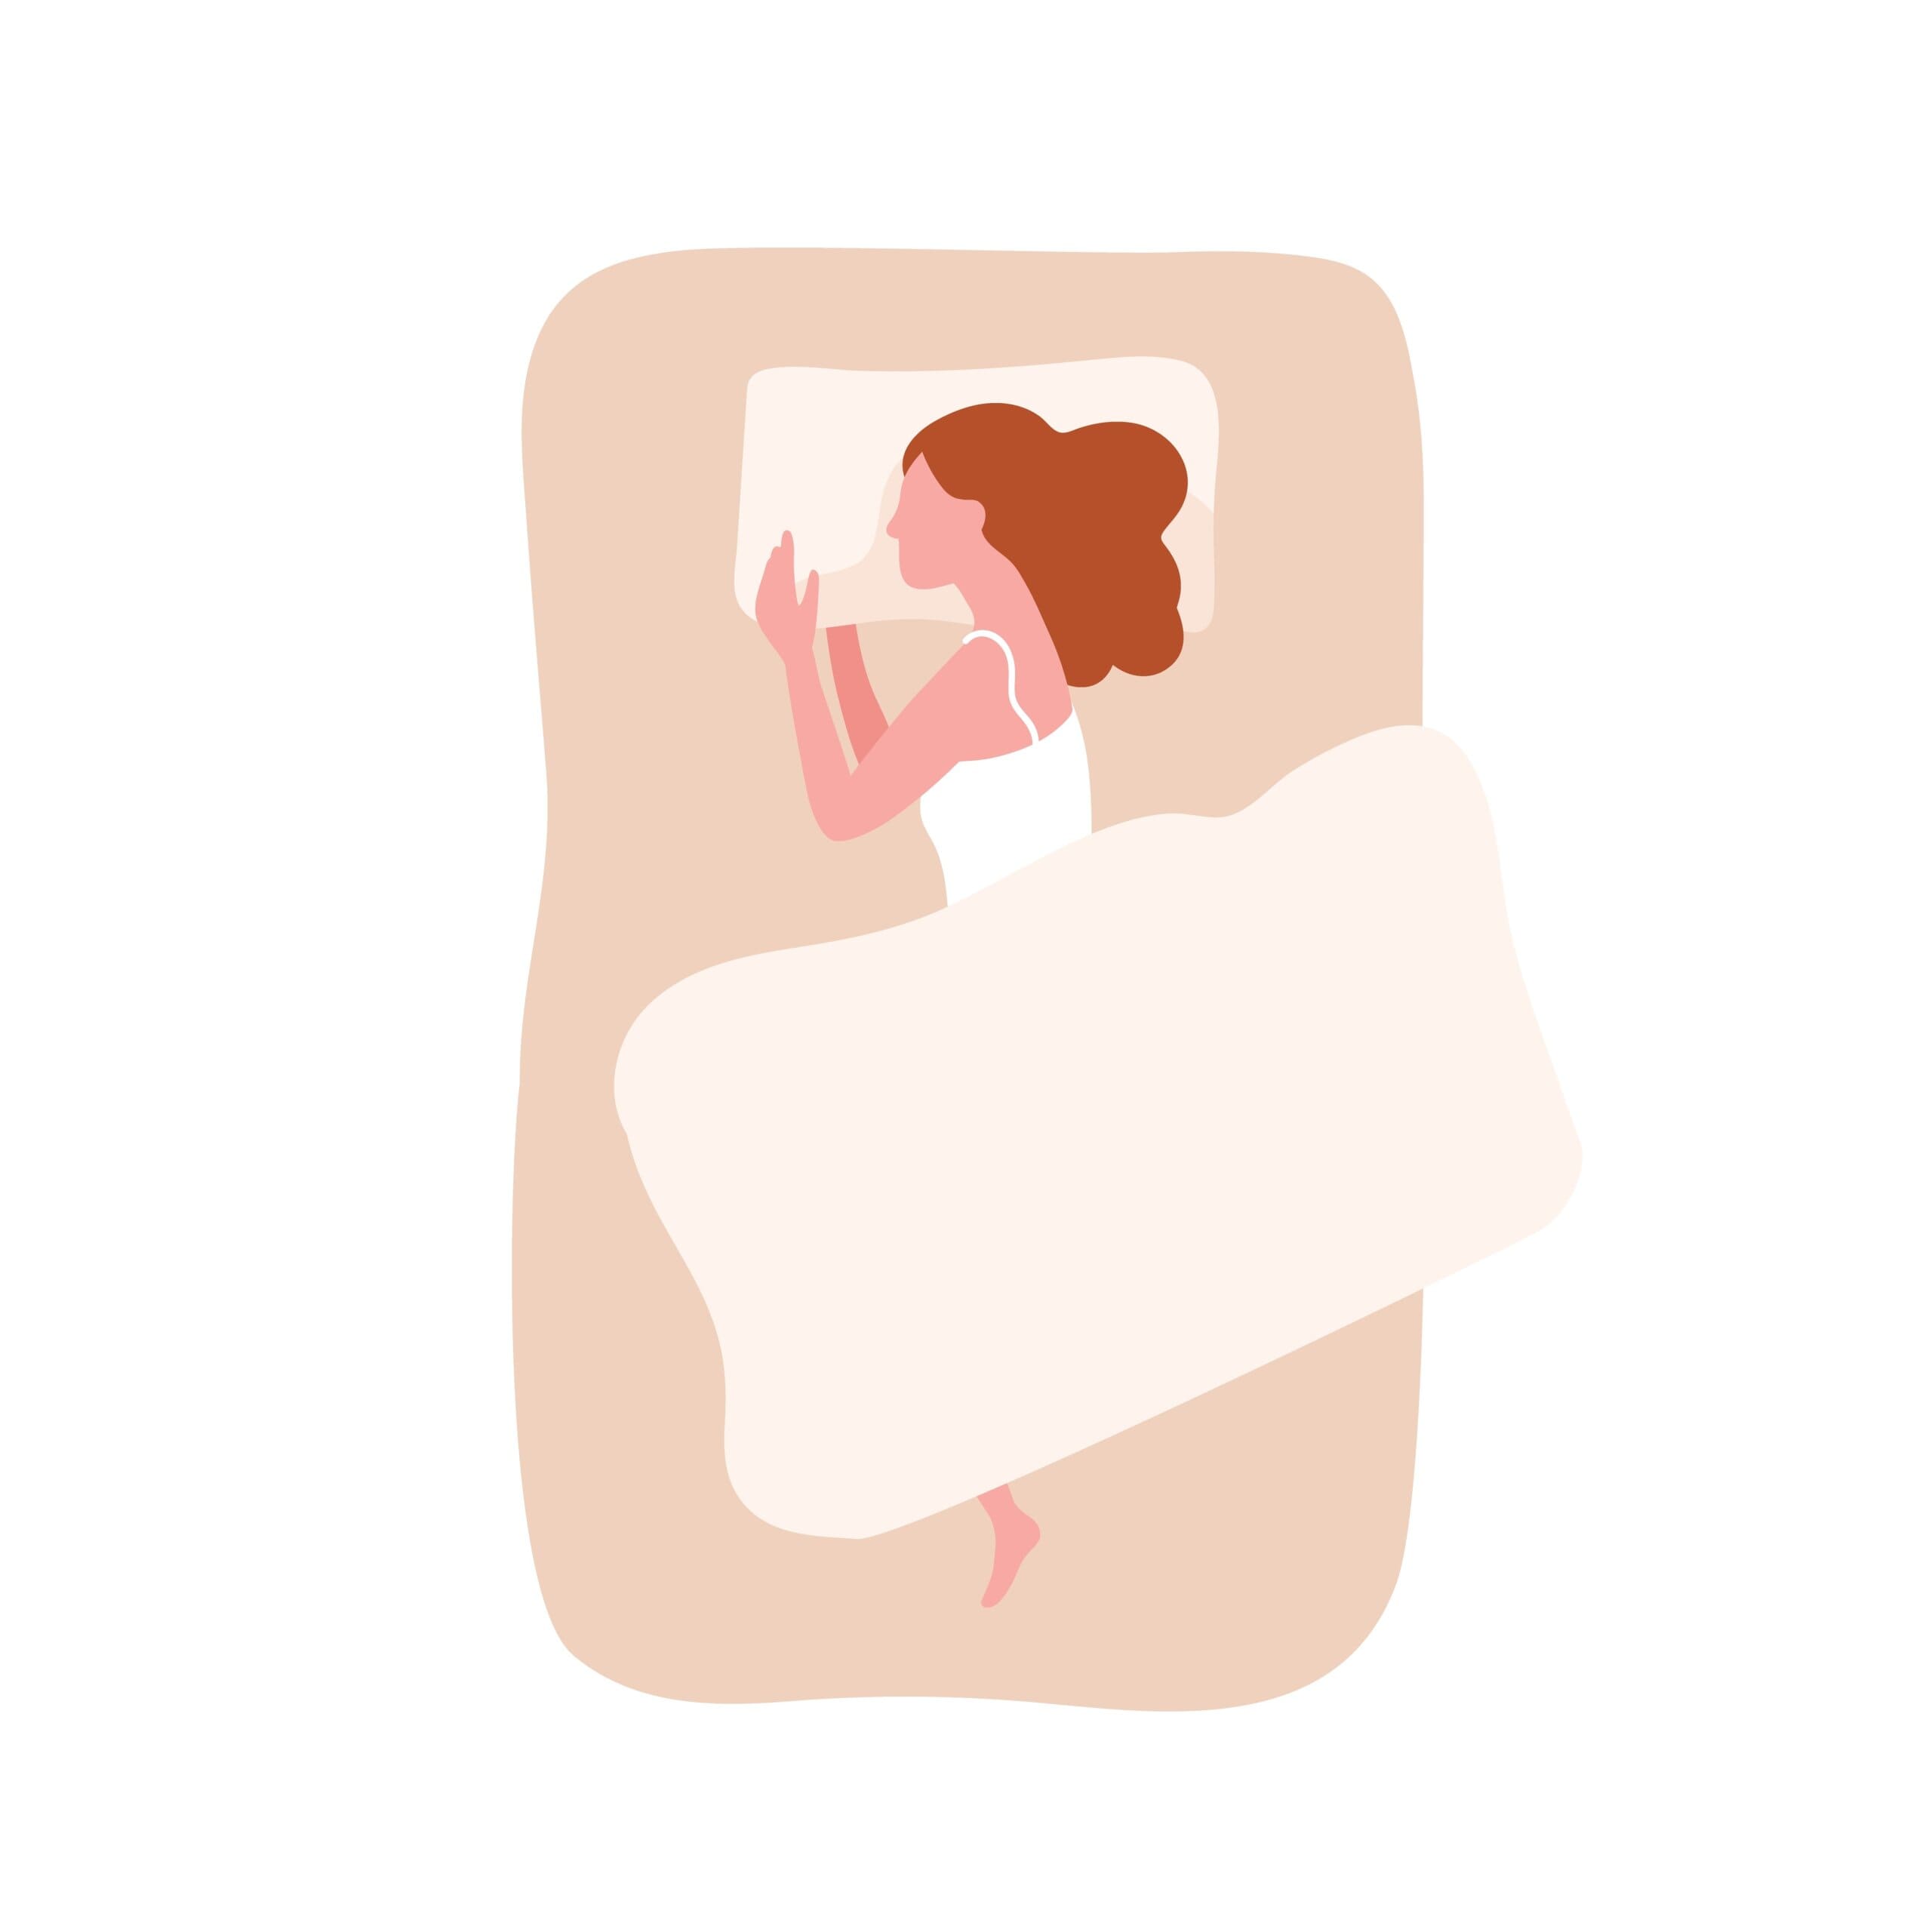 Cartoon of woman sleeping on her side with blanket over her.